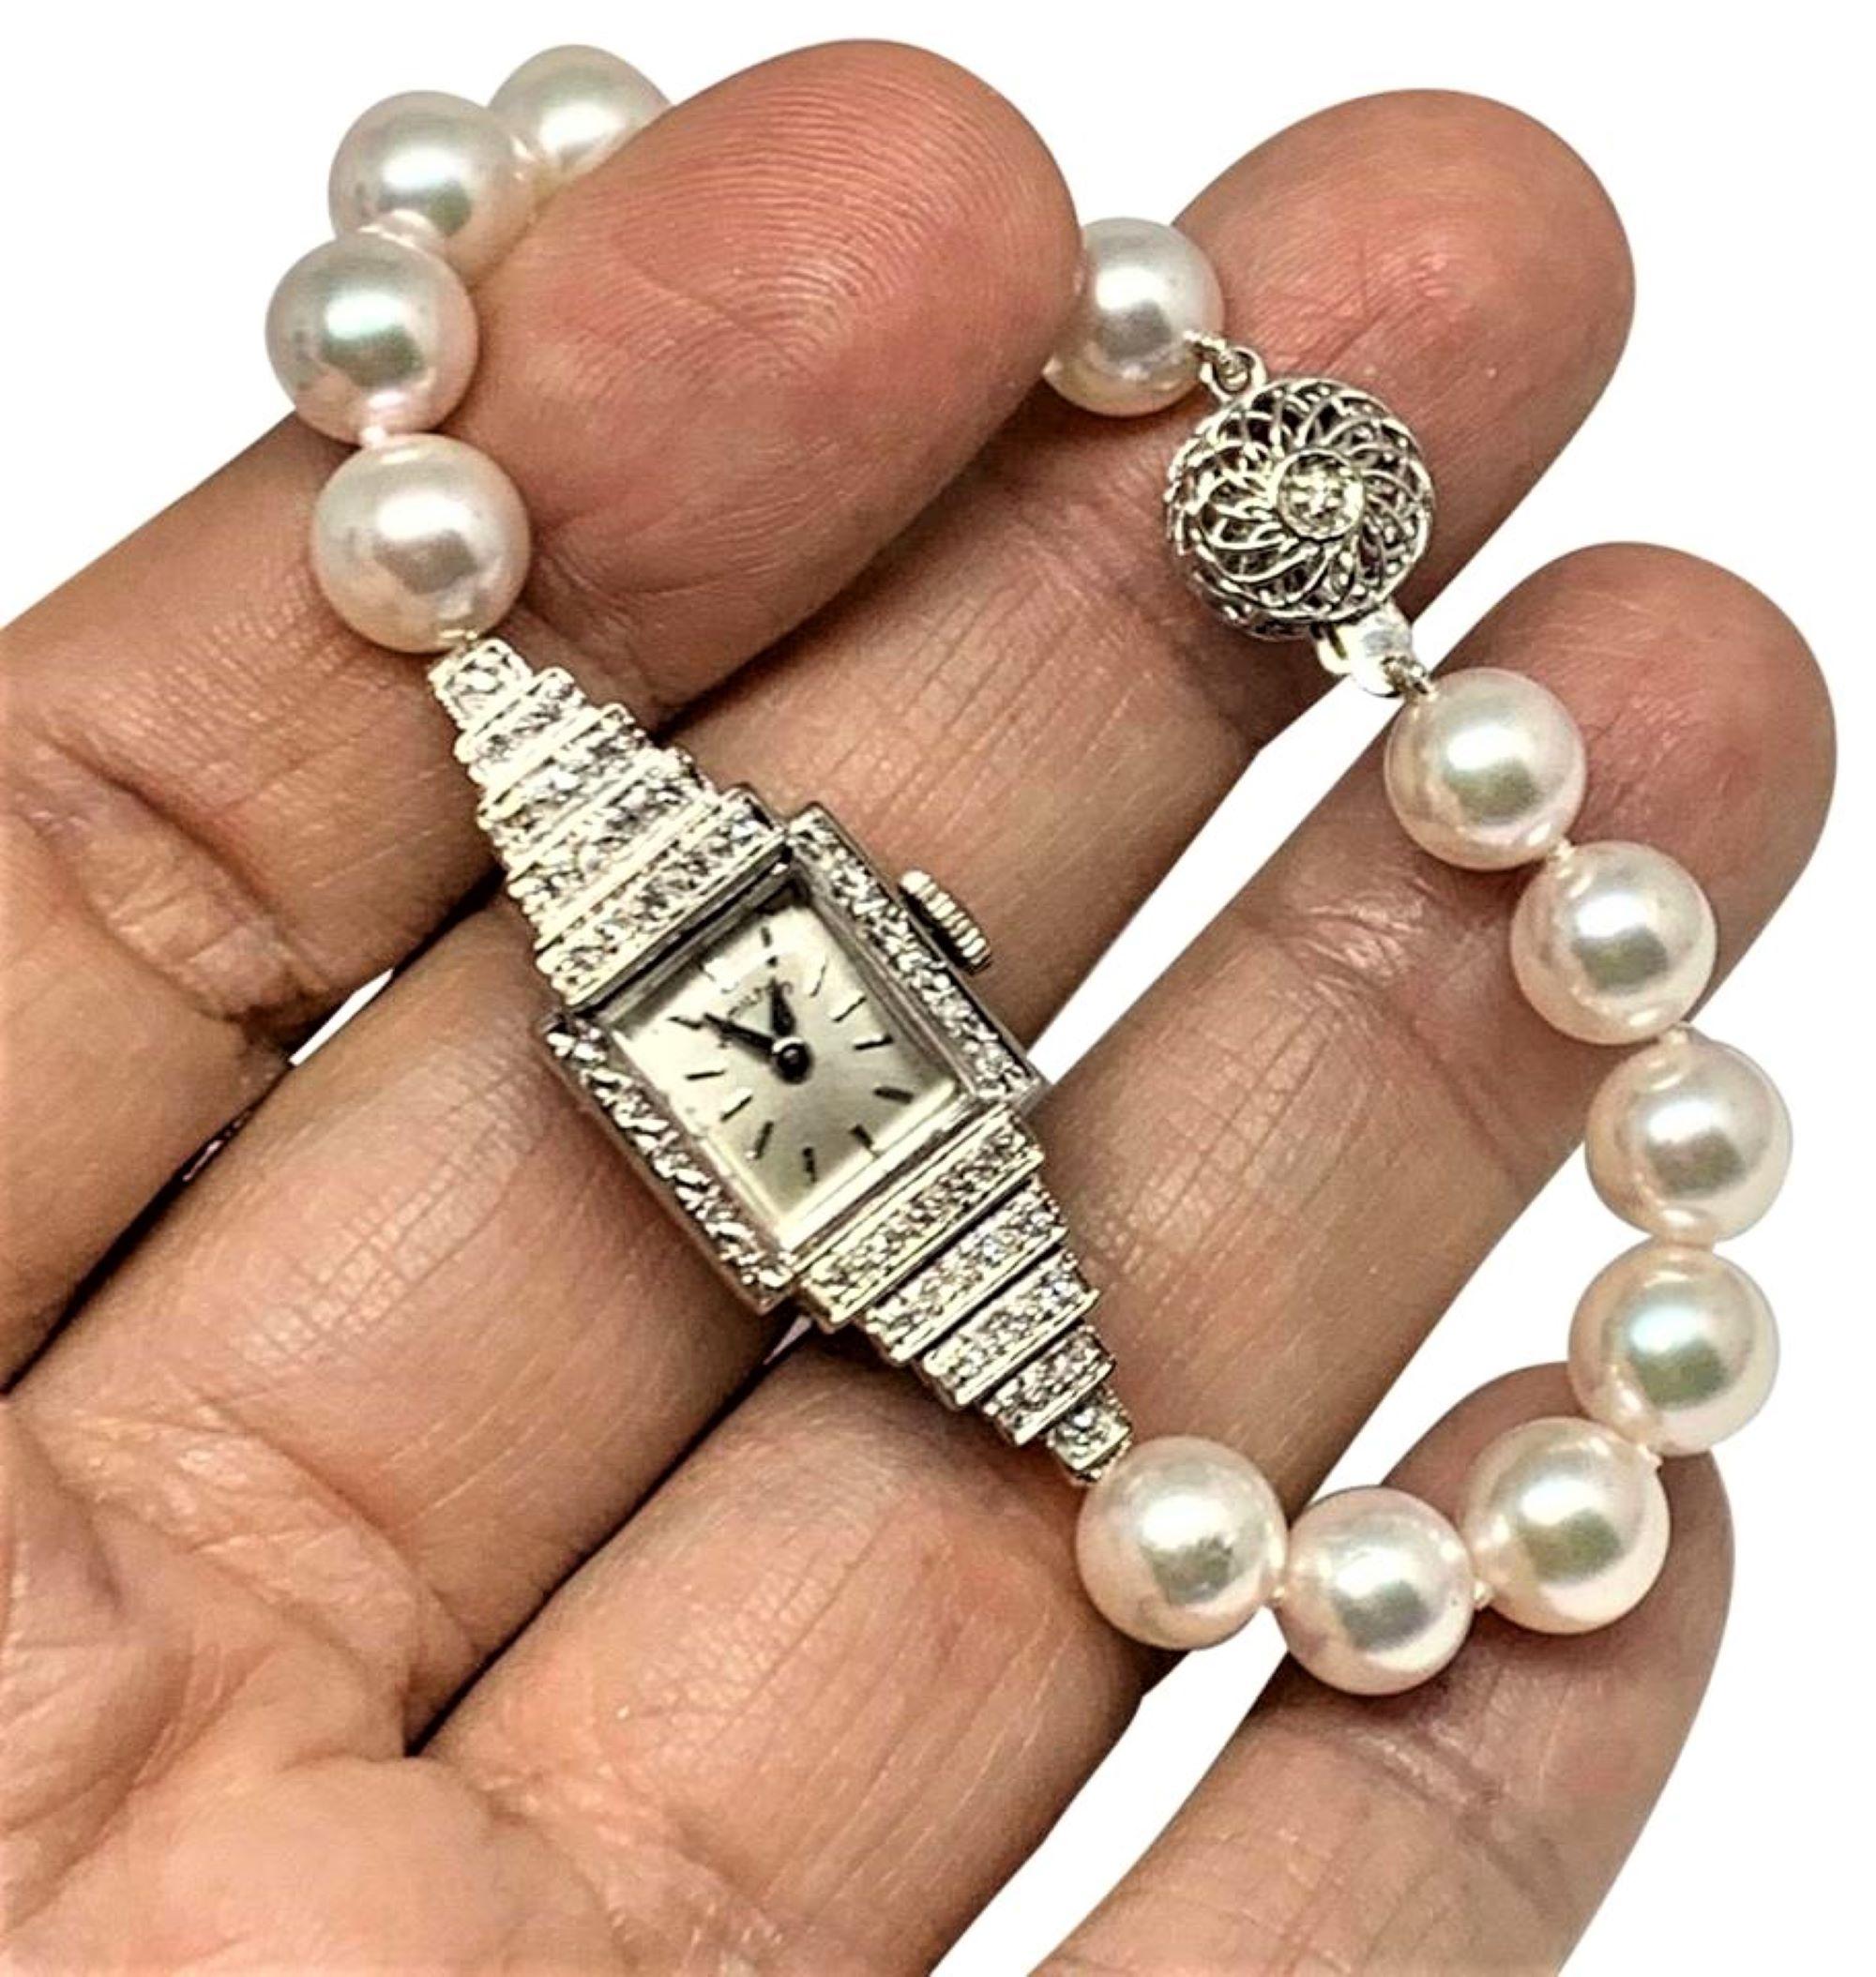 Fine Quality Akoya Pearl Diamond Hamilton Watch Bracelet 8.5mm14k Gold Certified $5950 915289

This is a Unique Custom Made Glamorous Piece of Jewelry!

Nothing says, “I Love you” more than Diamonds and Pearls!

This Akoya pearl bracelet watch has